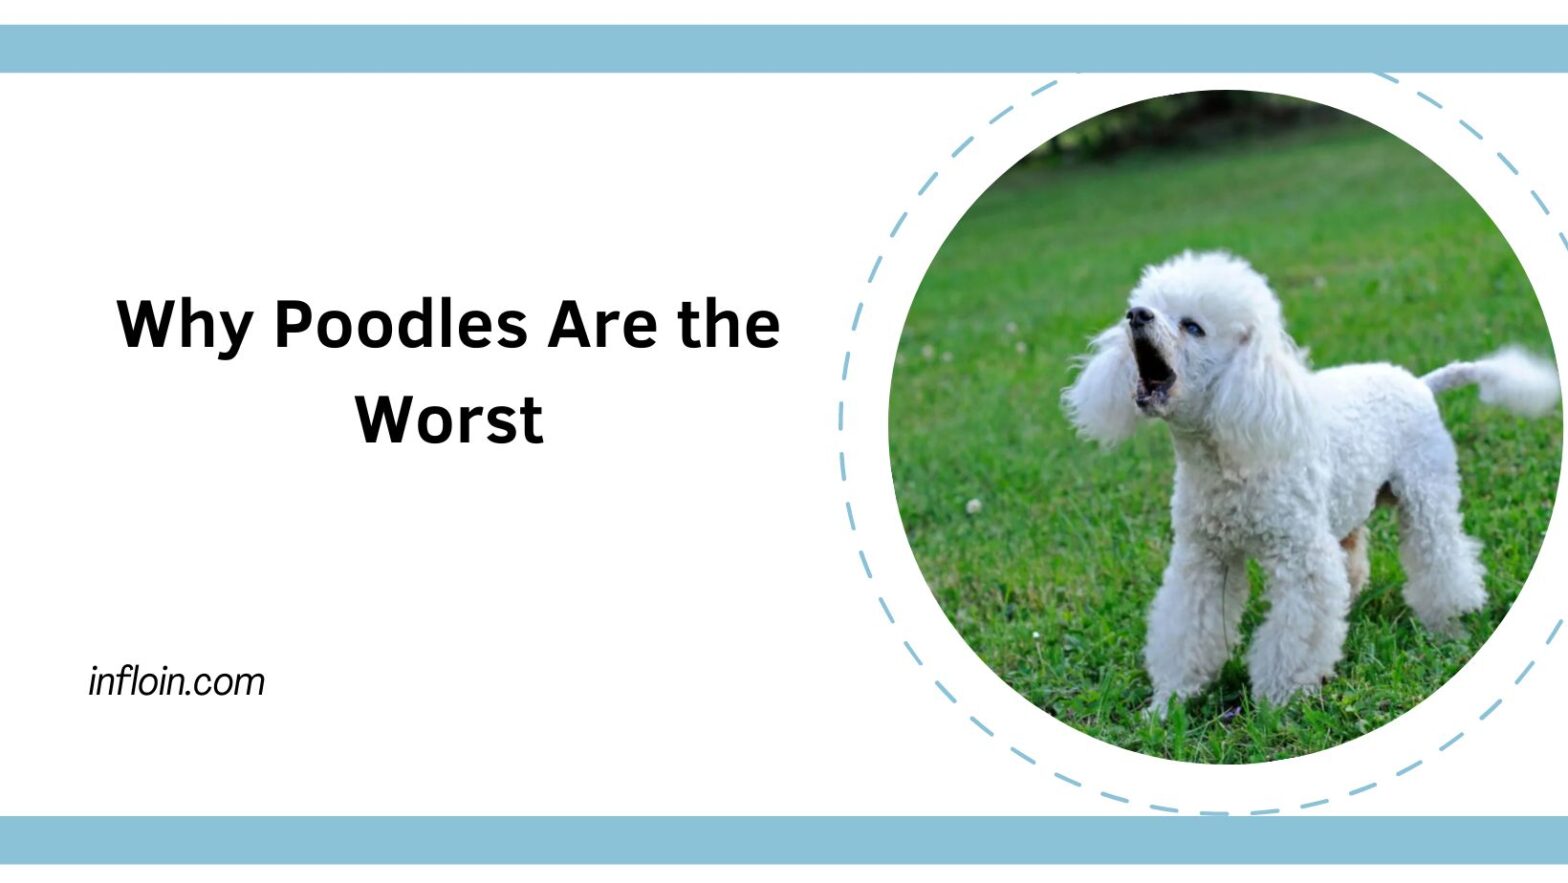 Why Poodles Are the Worst